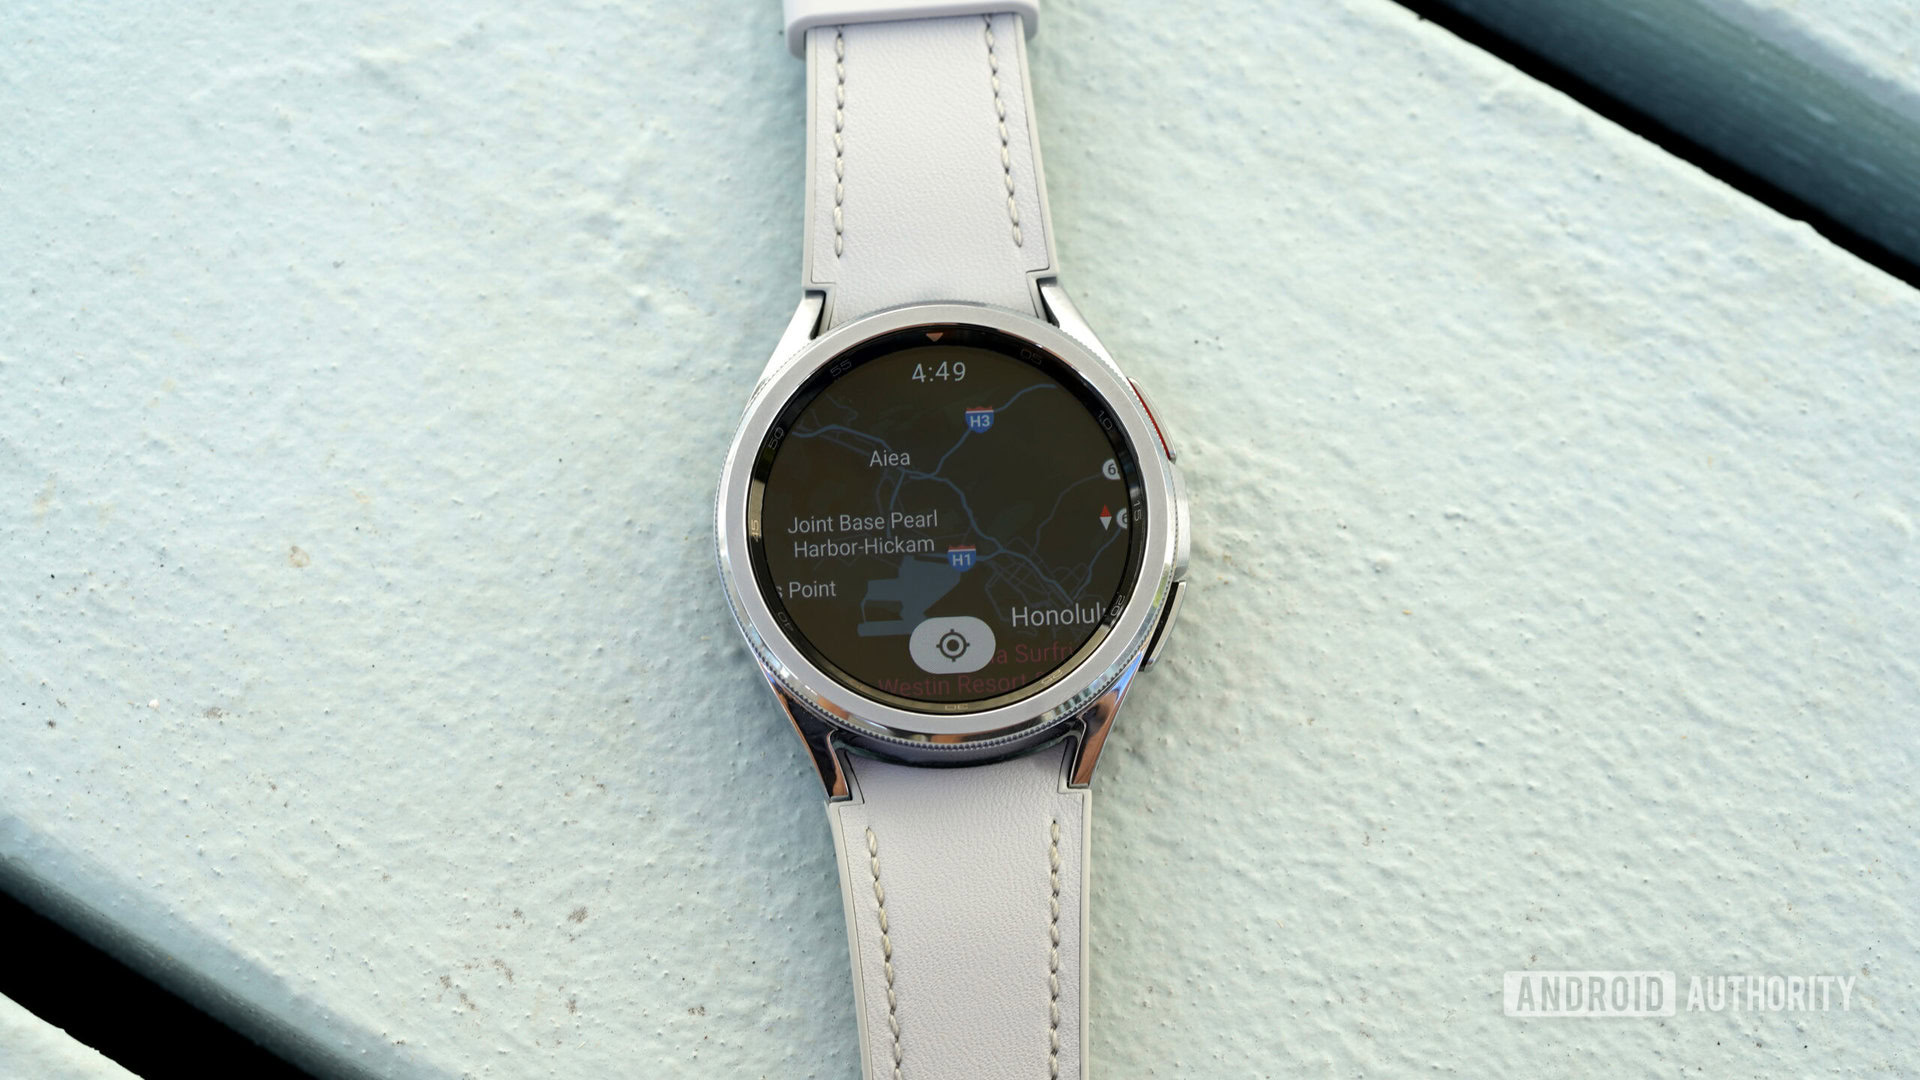 Wear OS buyer's guide: What you need to know - Android Authority